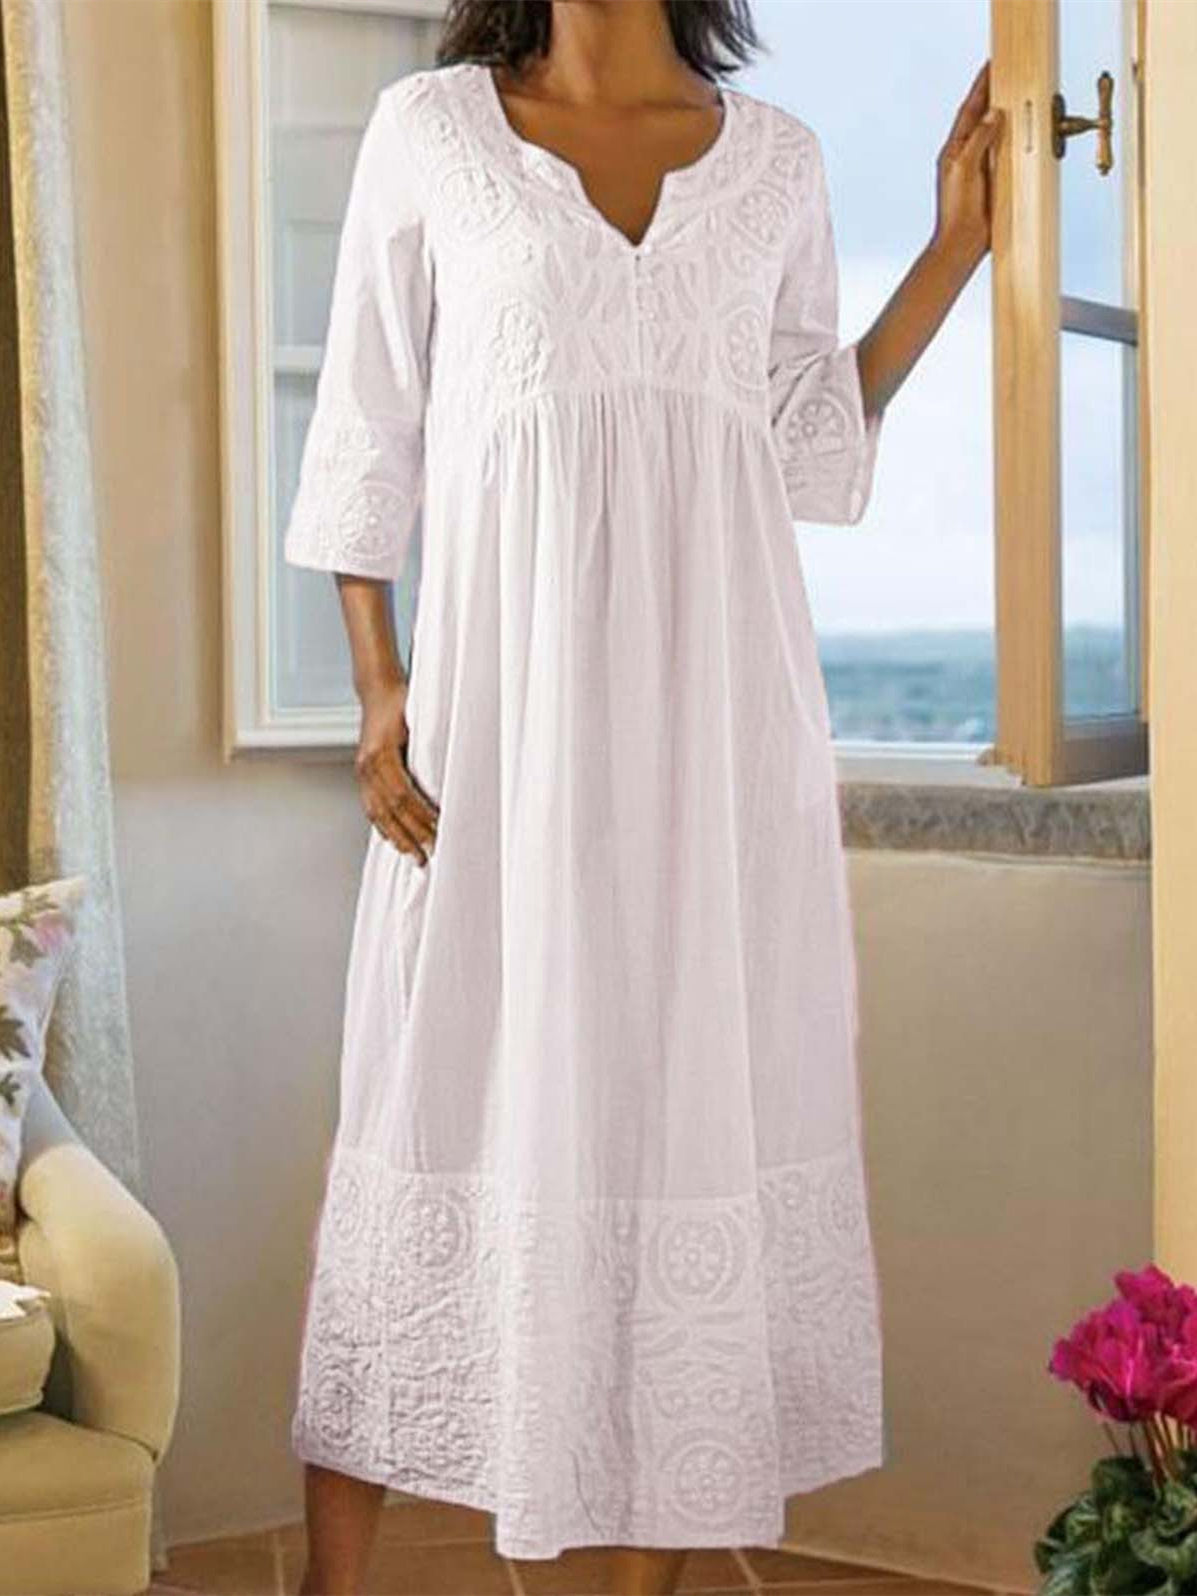 Women 3/4 Sleeve V-neck Lace Floral Printed Maxi Dress